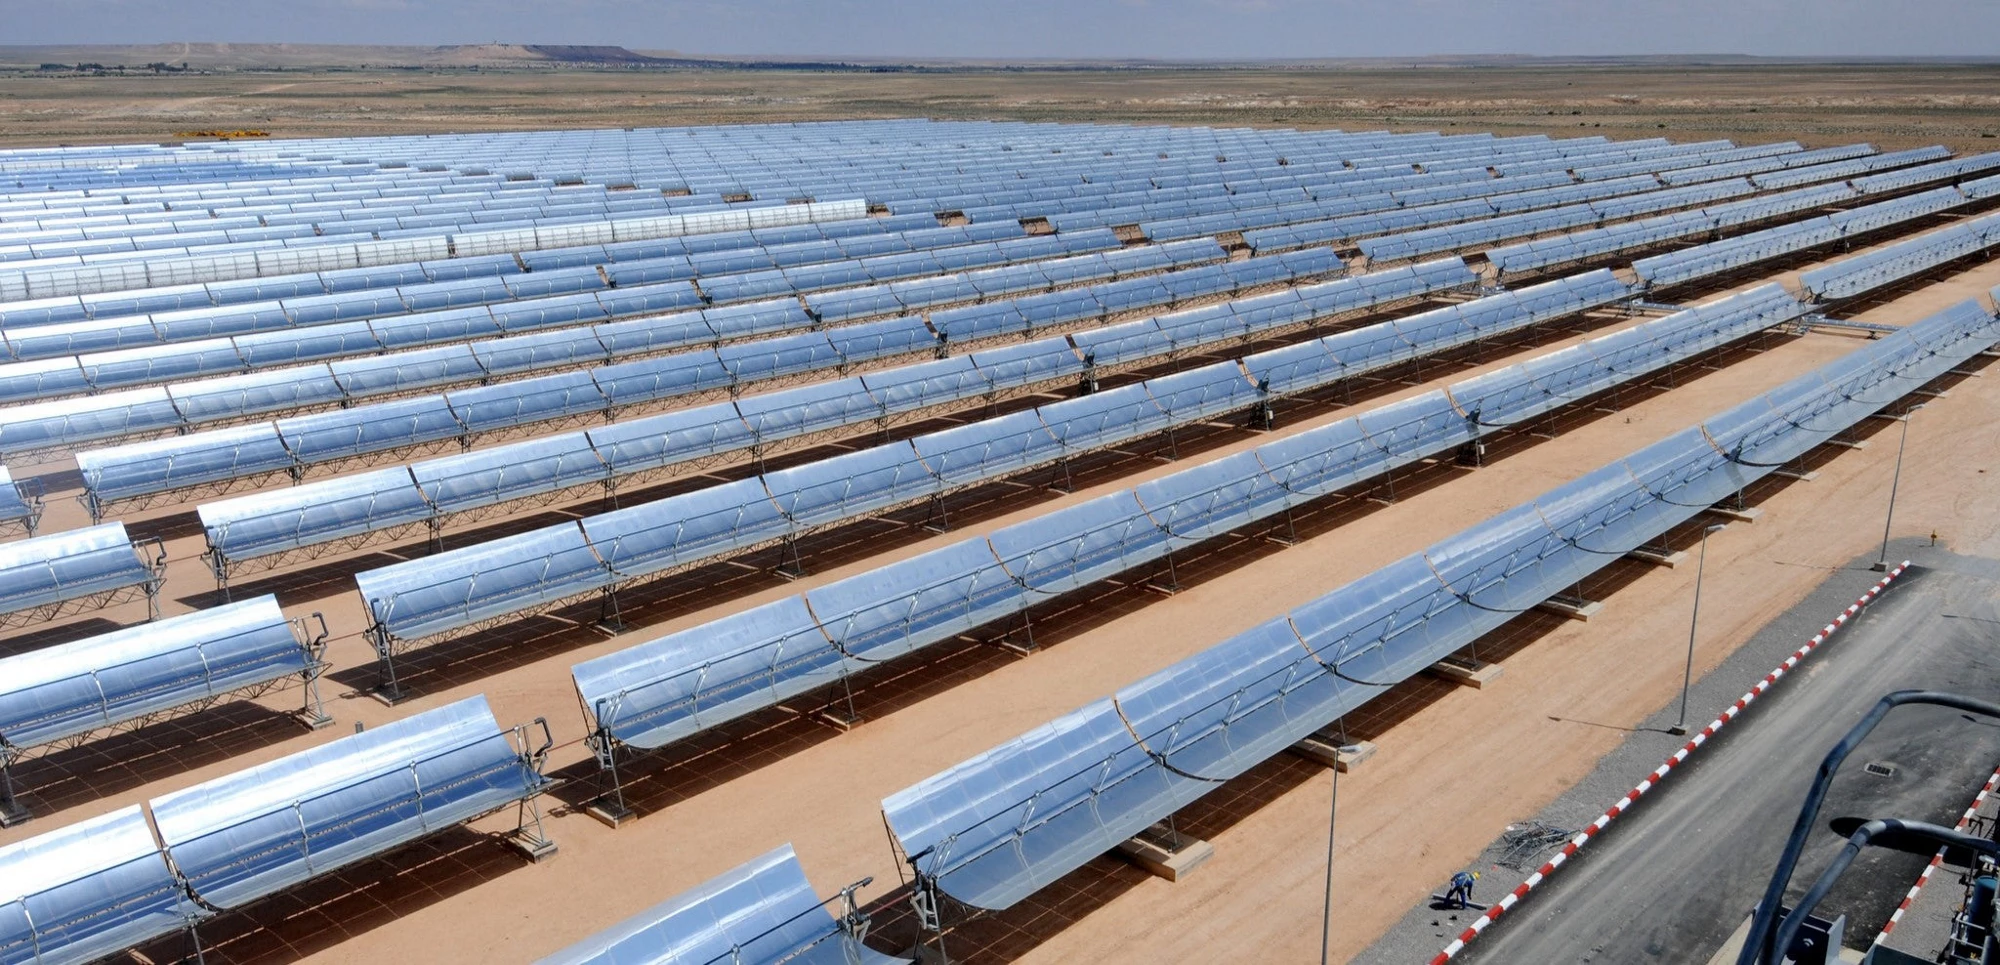 Rows of solar panel at a thermo-solar power plant. Copyright: World Bank.